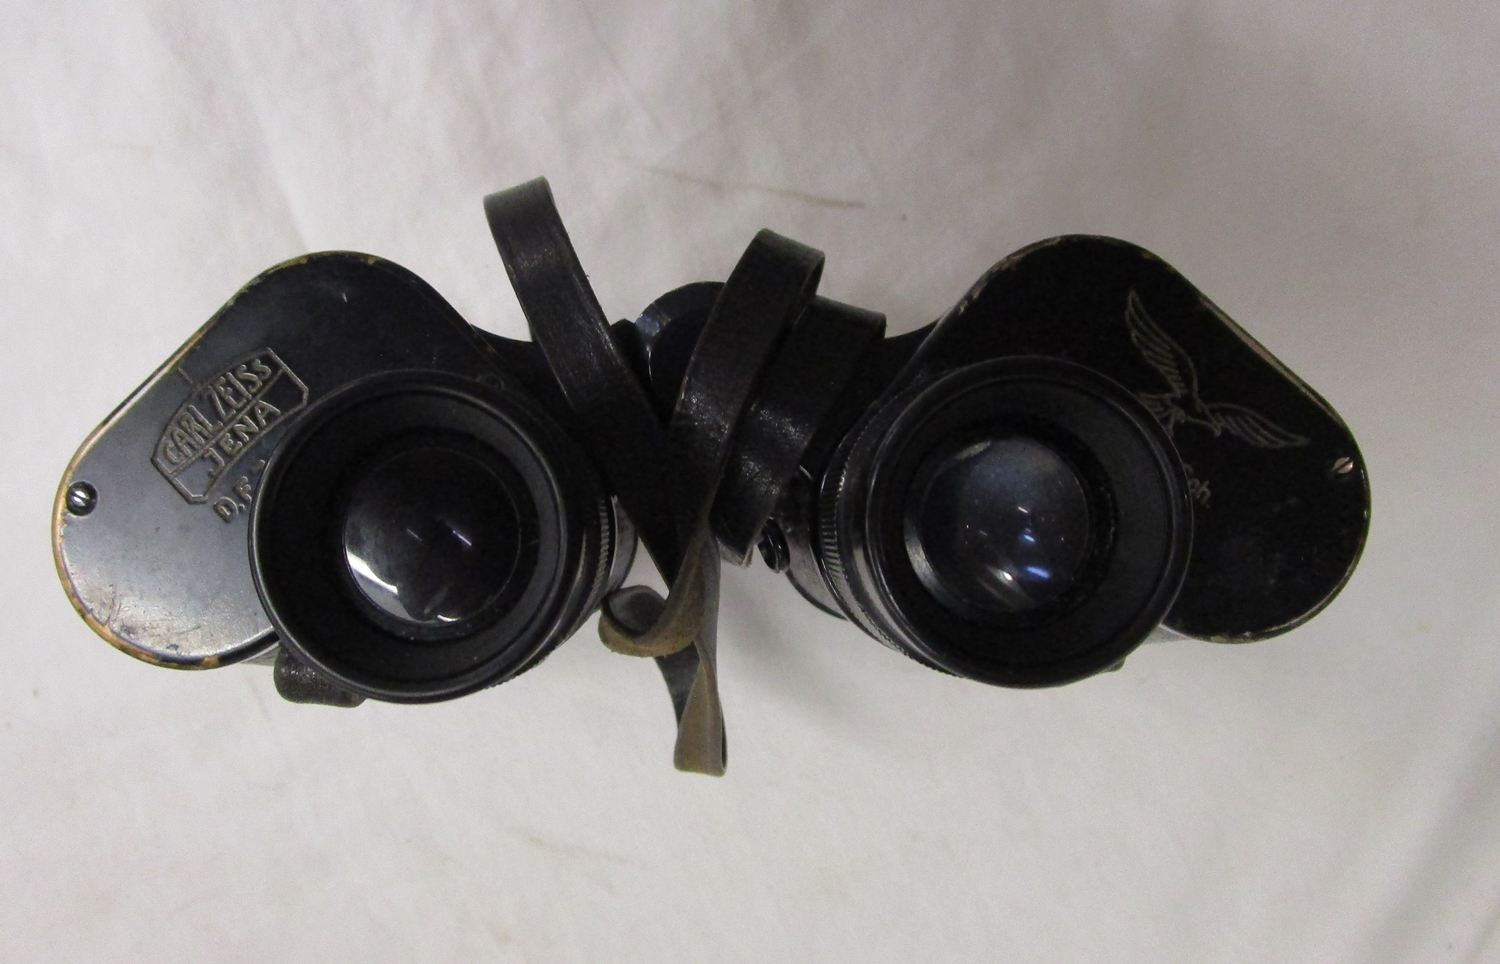 Nazi WWII Carl Zeiss 7x50 binoculars, marked with eagle and swastika - Image 8 of 10